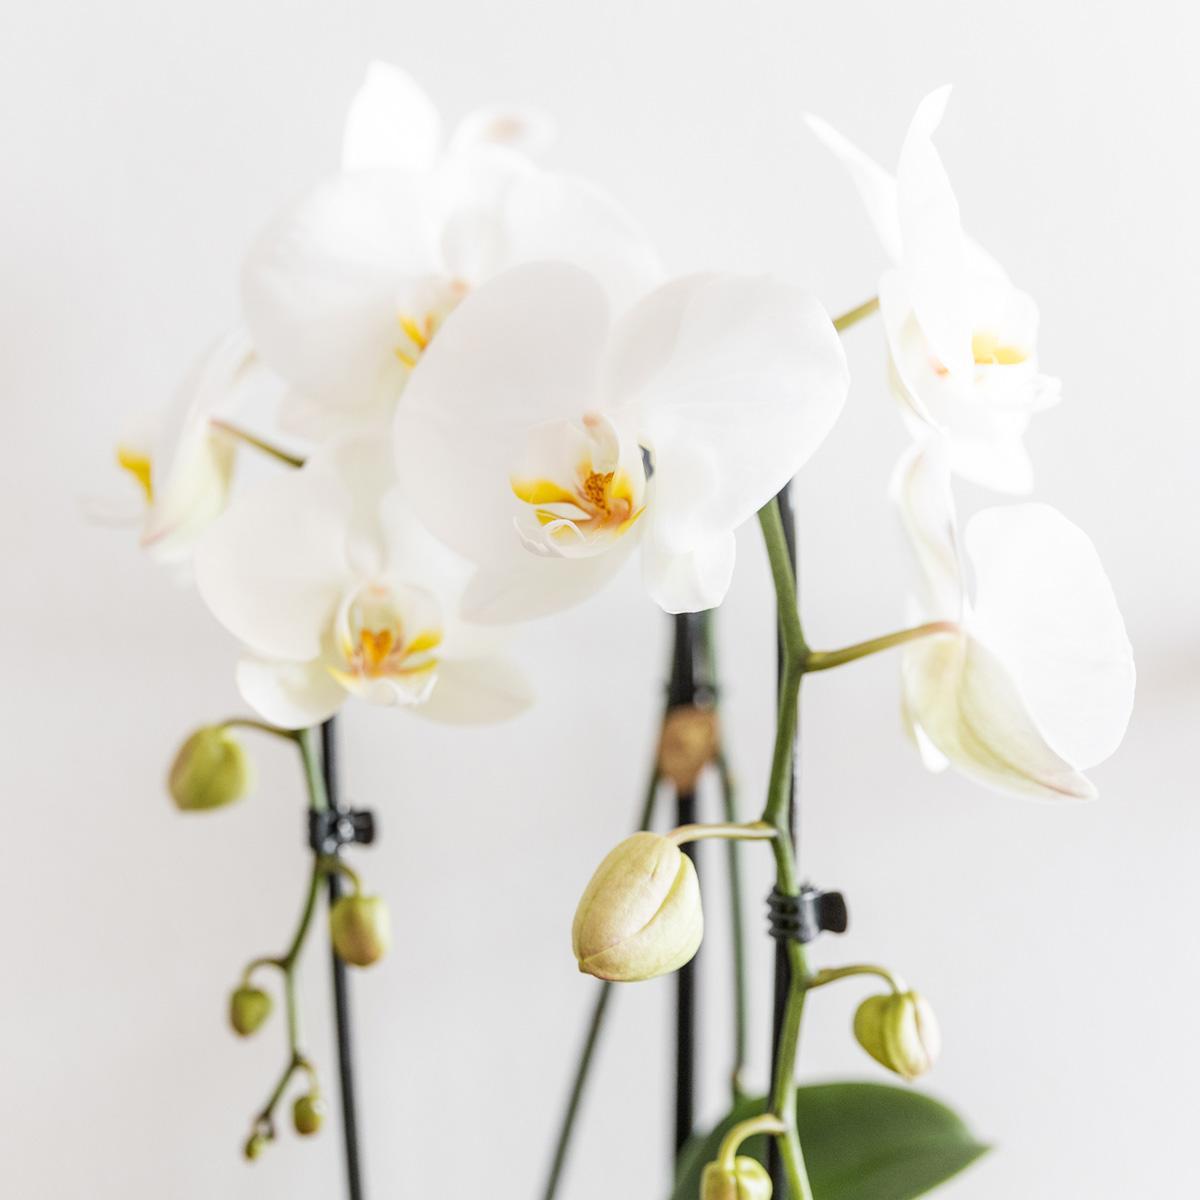 White Phalaenopsis Niagara Fall orchid and its golden flowerpot - flowering houseplant